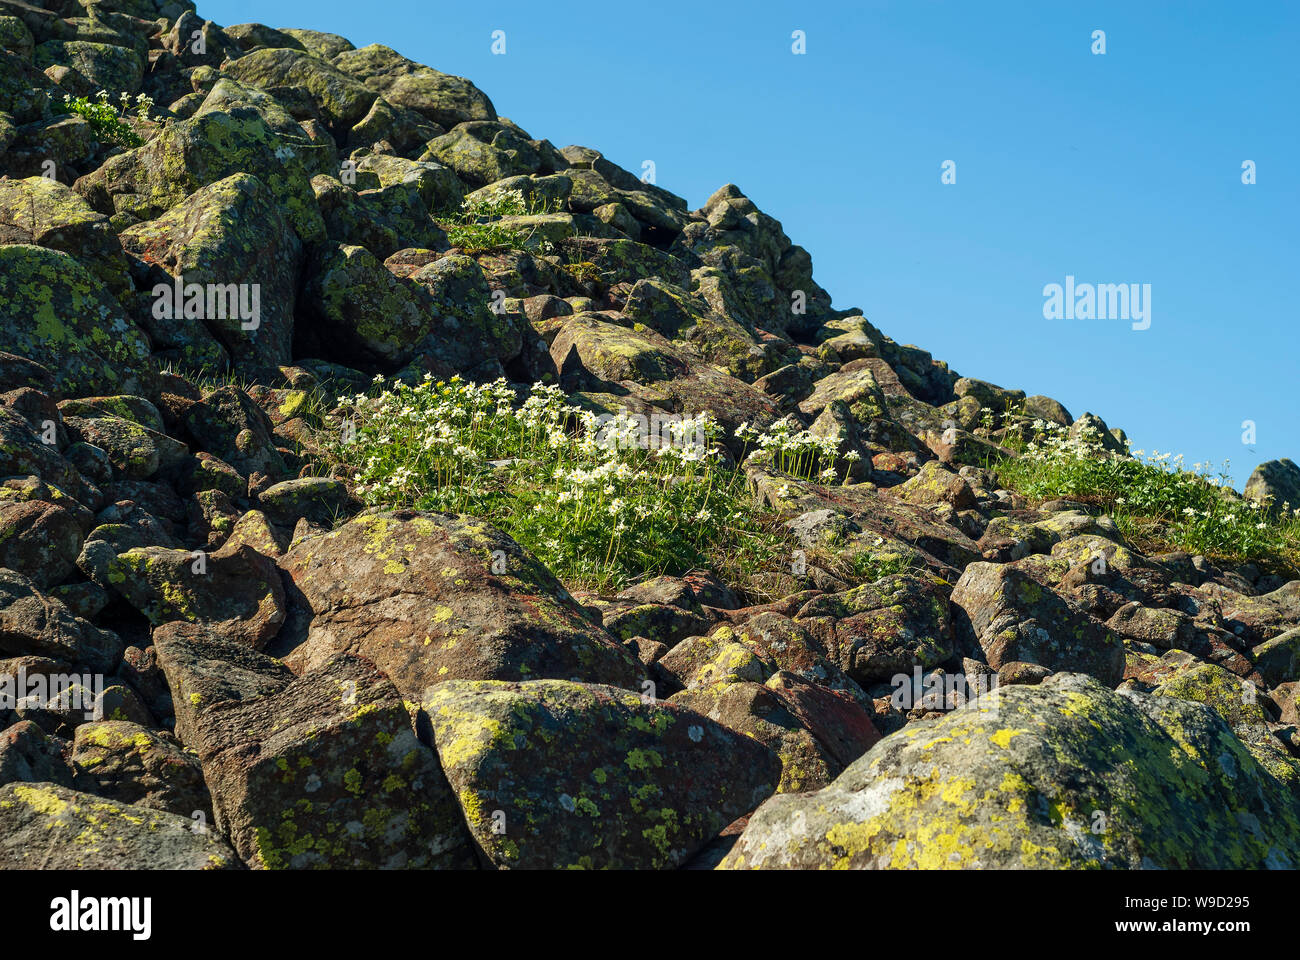 fragment of a stone scree on a high mountain slope with flowering alpine vegetation and blue sky Stock Photo